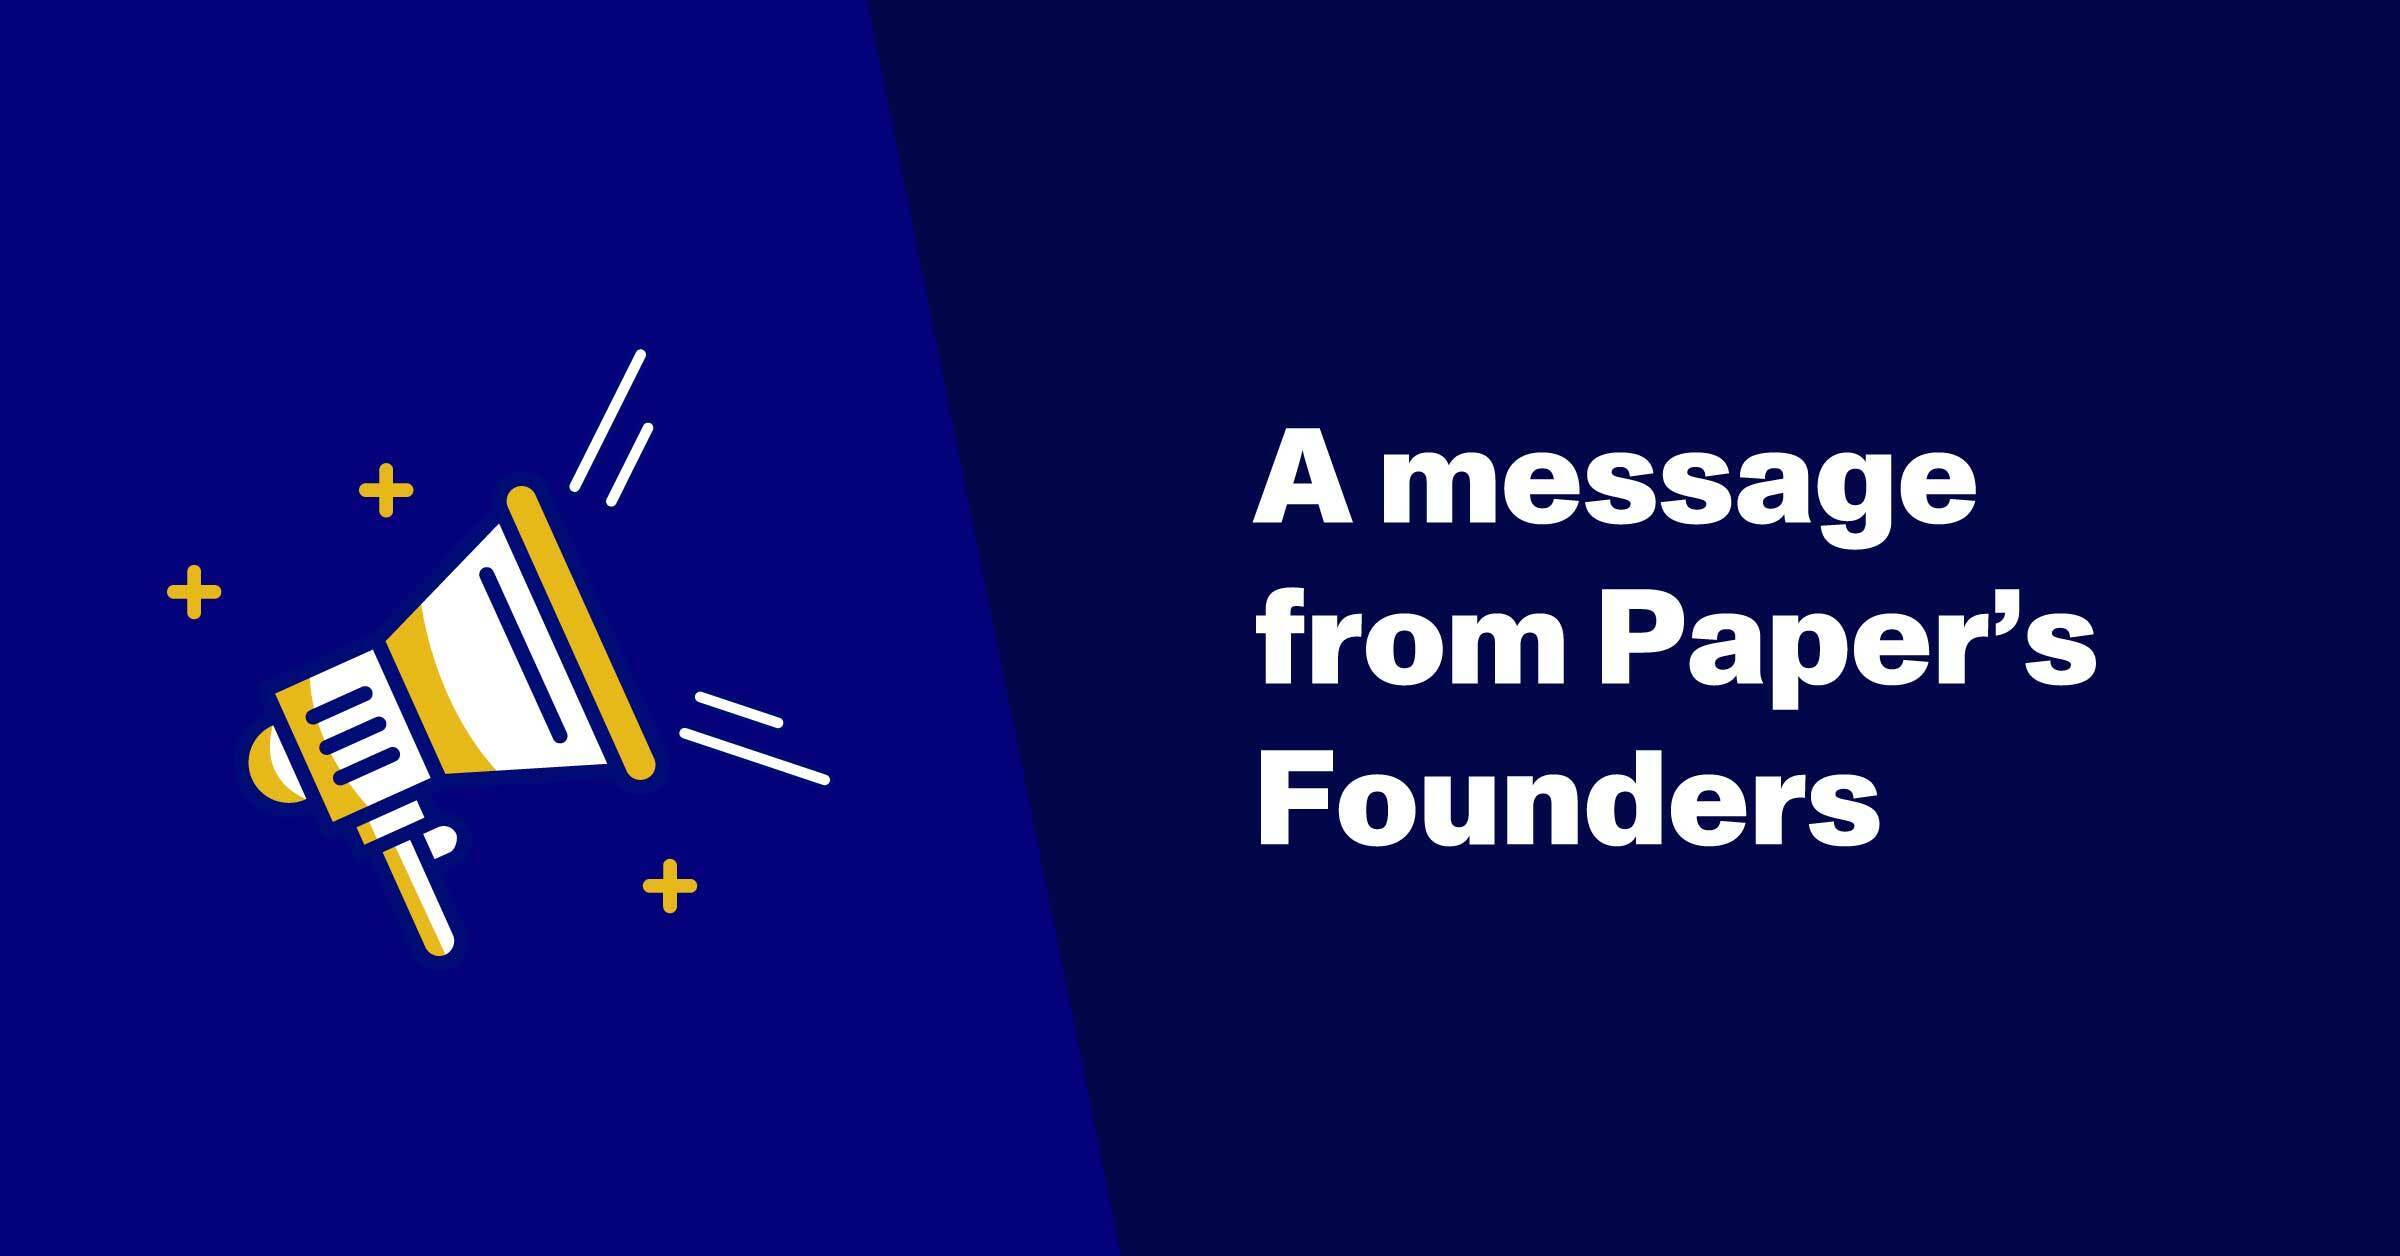 A Message from Paper's Founders